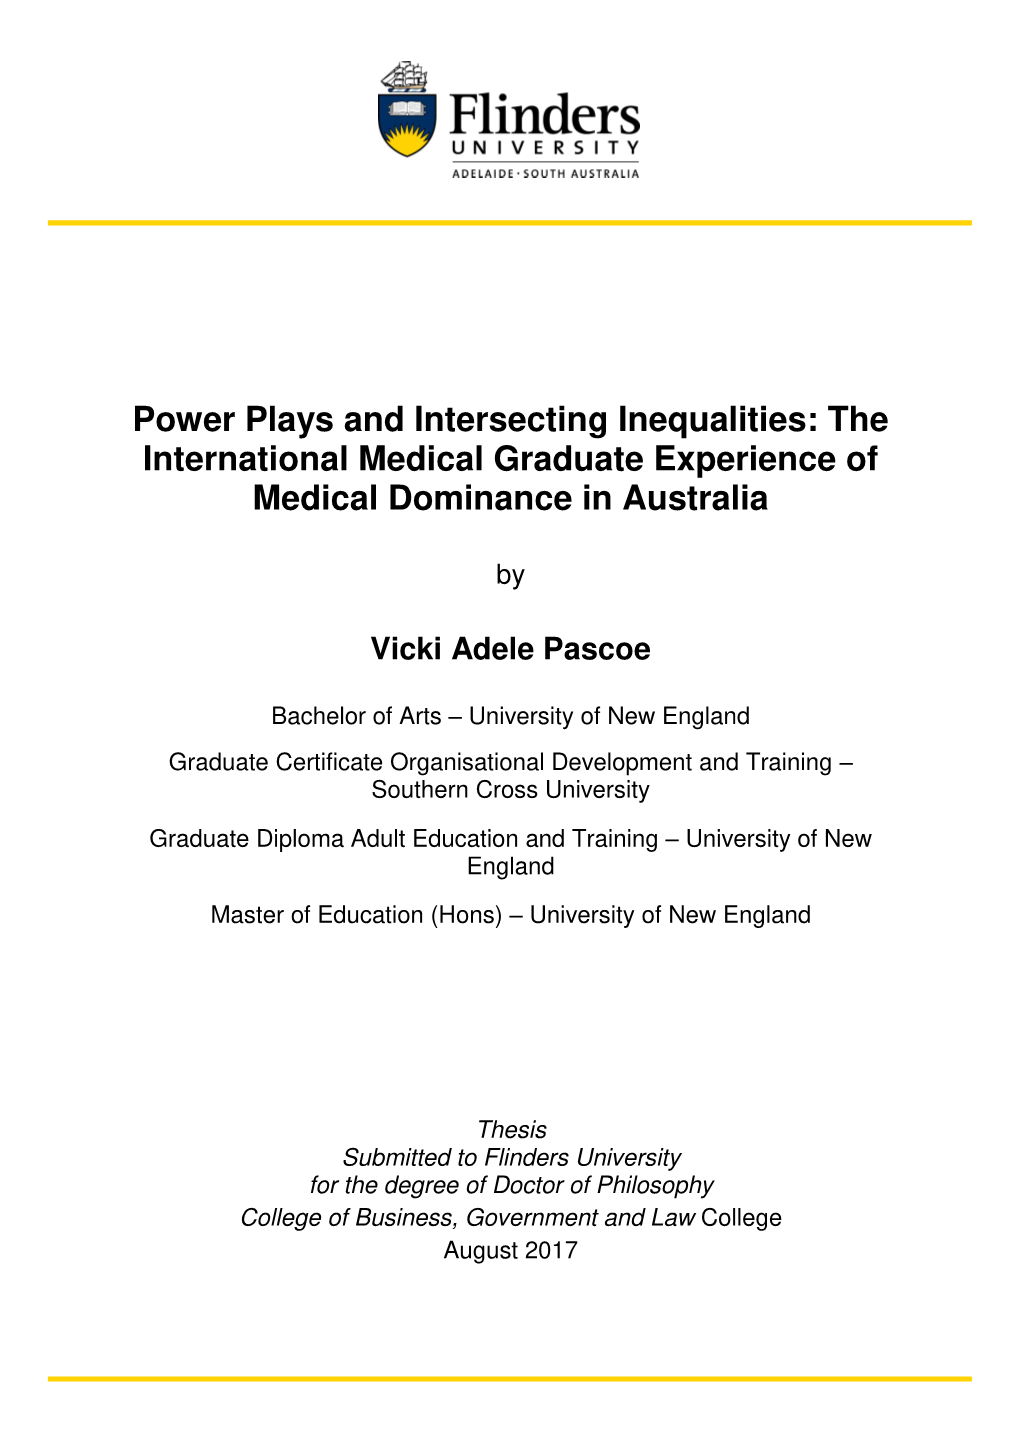 Power Plays and Intersecting Inequalities: the International Medical Graduate Experience of Medical Dominance in Australia